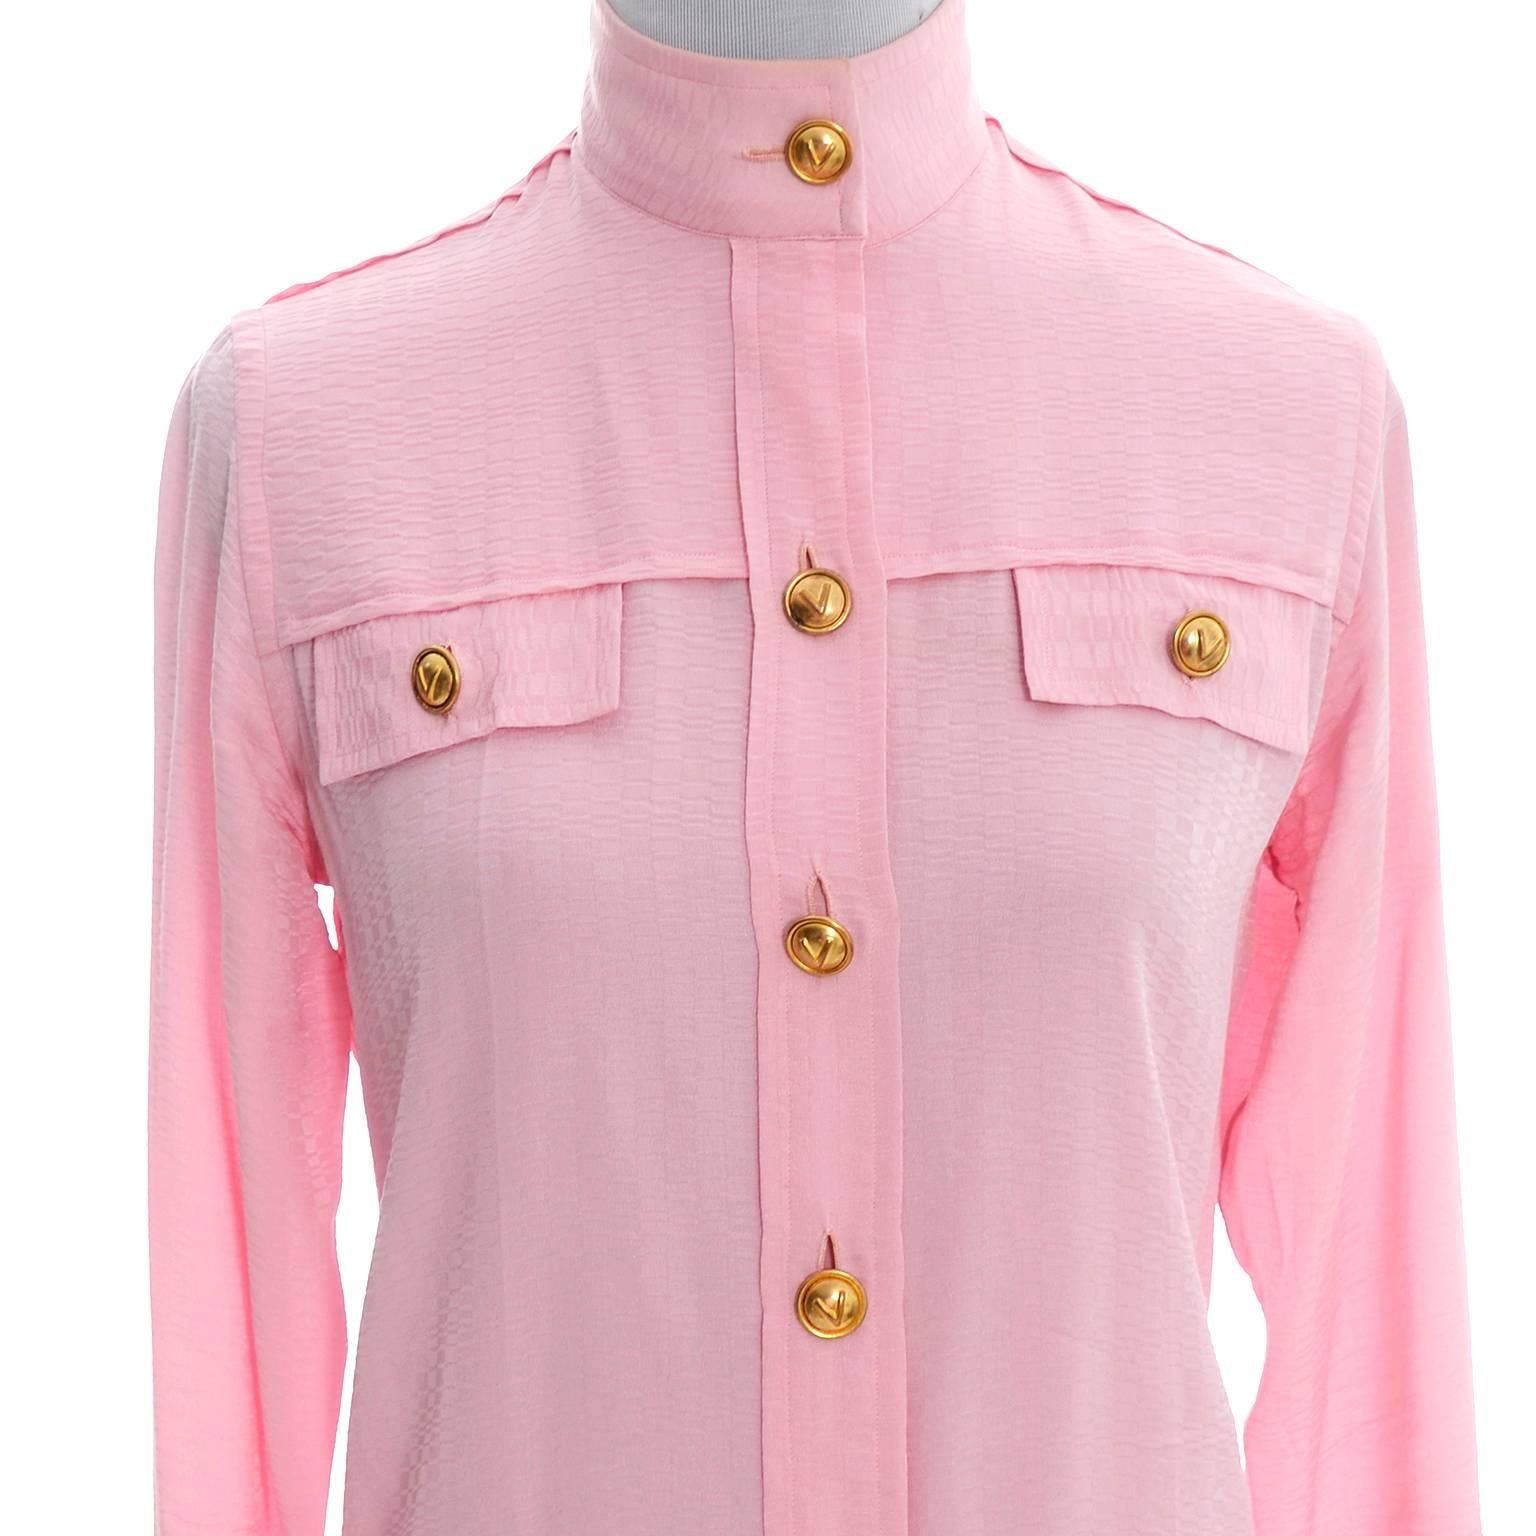 Rare 70s Valentino Pink Silk Bow Blouse V Logo Buttons Older Label Early 1970s 1